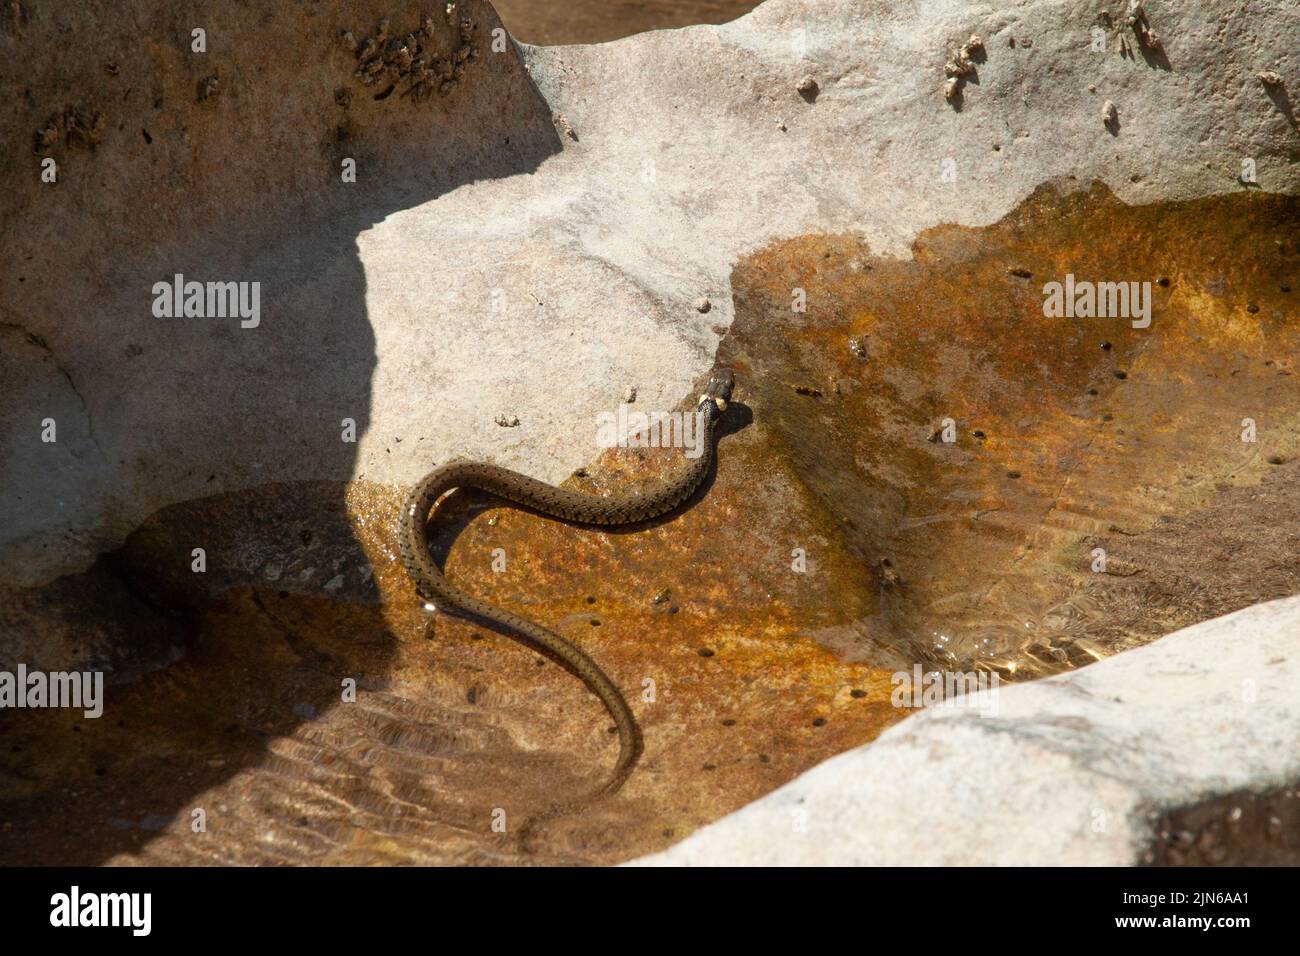 Water snake swims in a puddle on a rock by the river Stock Photo